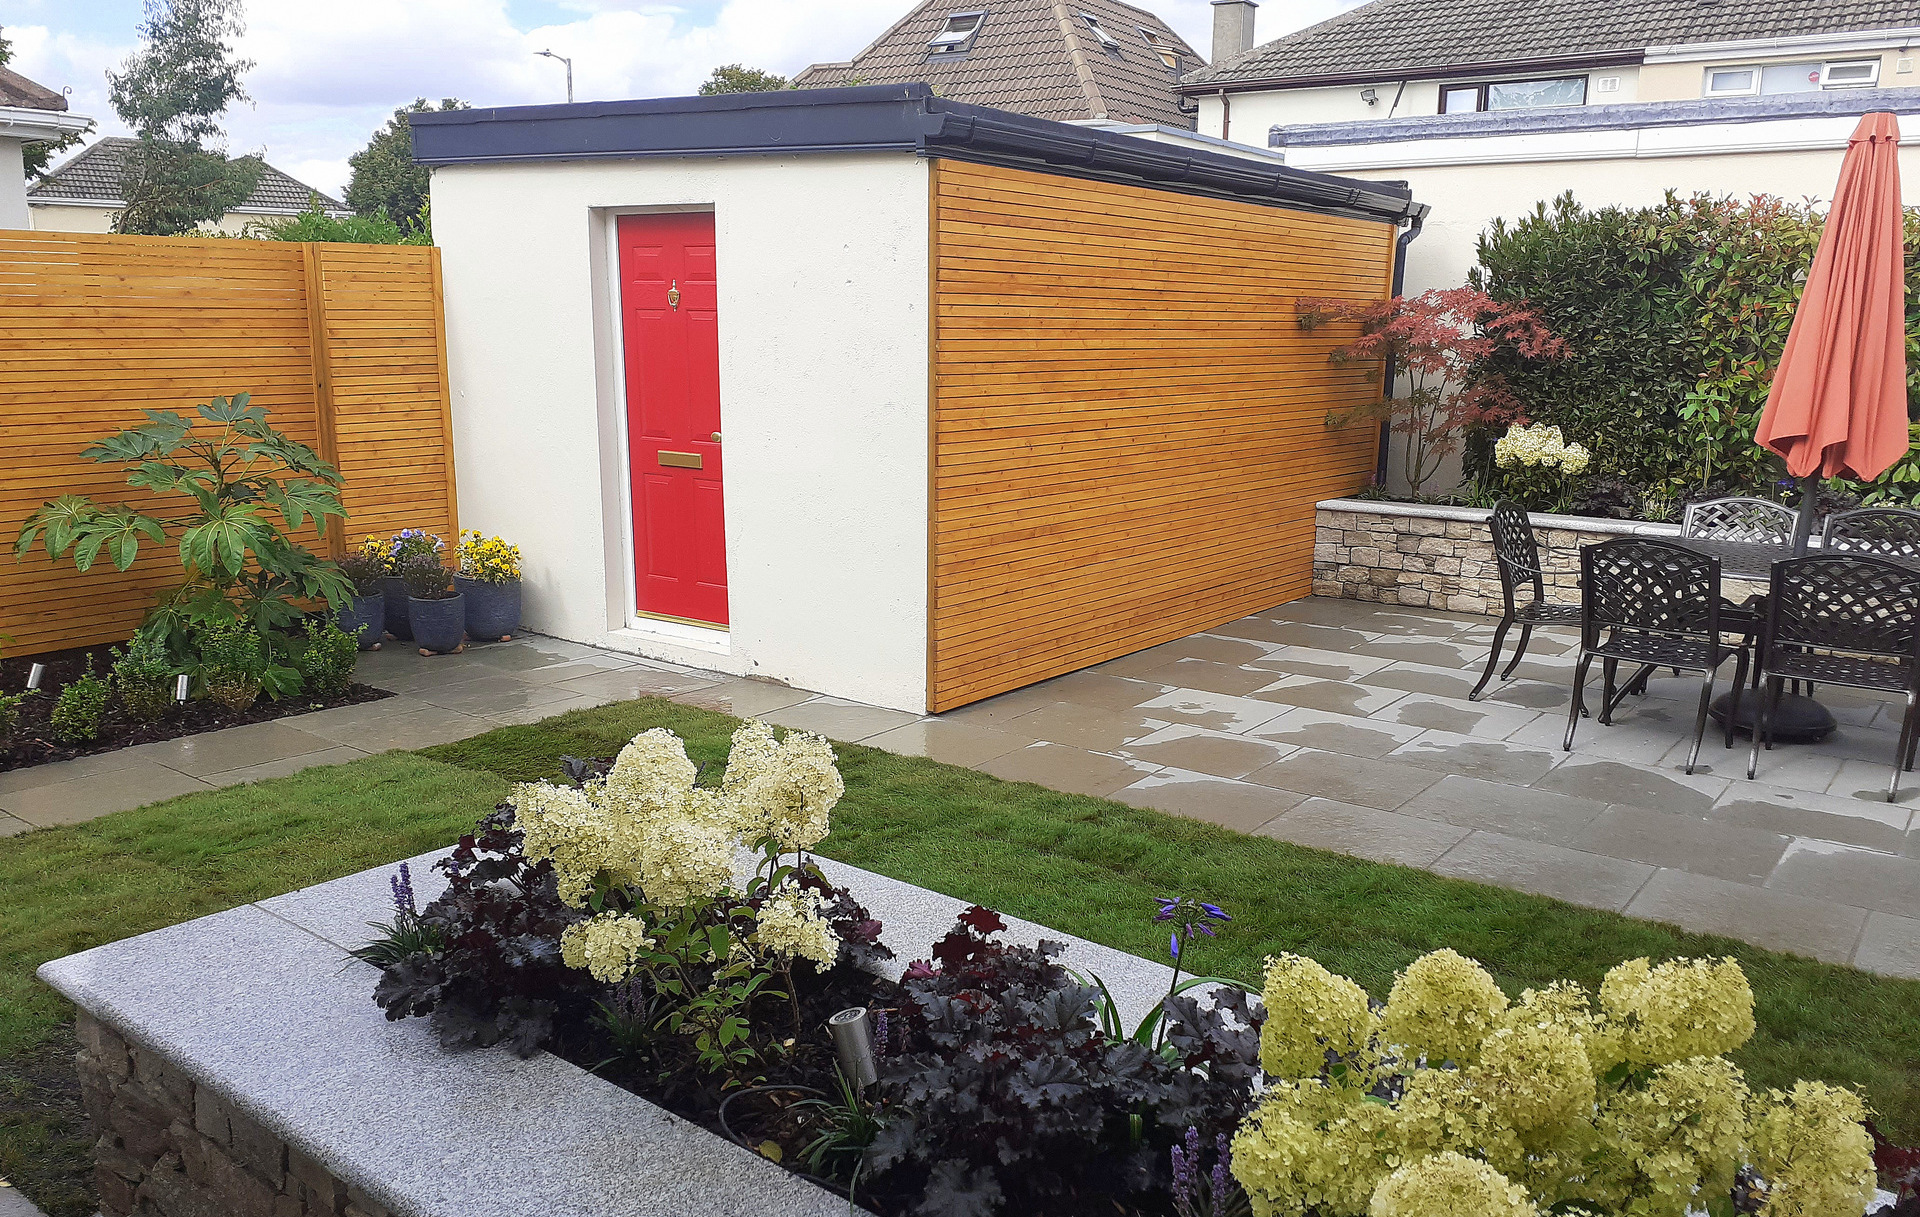 Family Garden Garden Design & Landscaping project in Firhouse, Dublin 24 featuring limestone patios, custom made horizontal slatted fencing, raised planter beds in natural stone, lush low maintenance planting & split level patios.